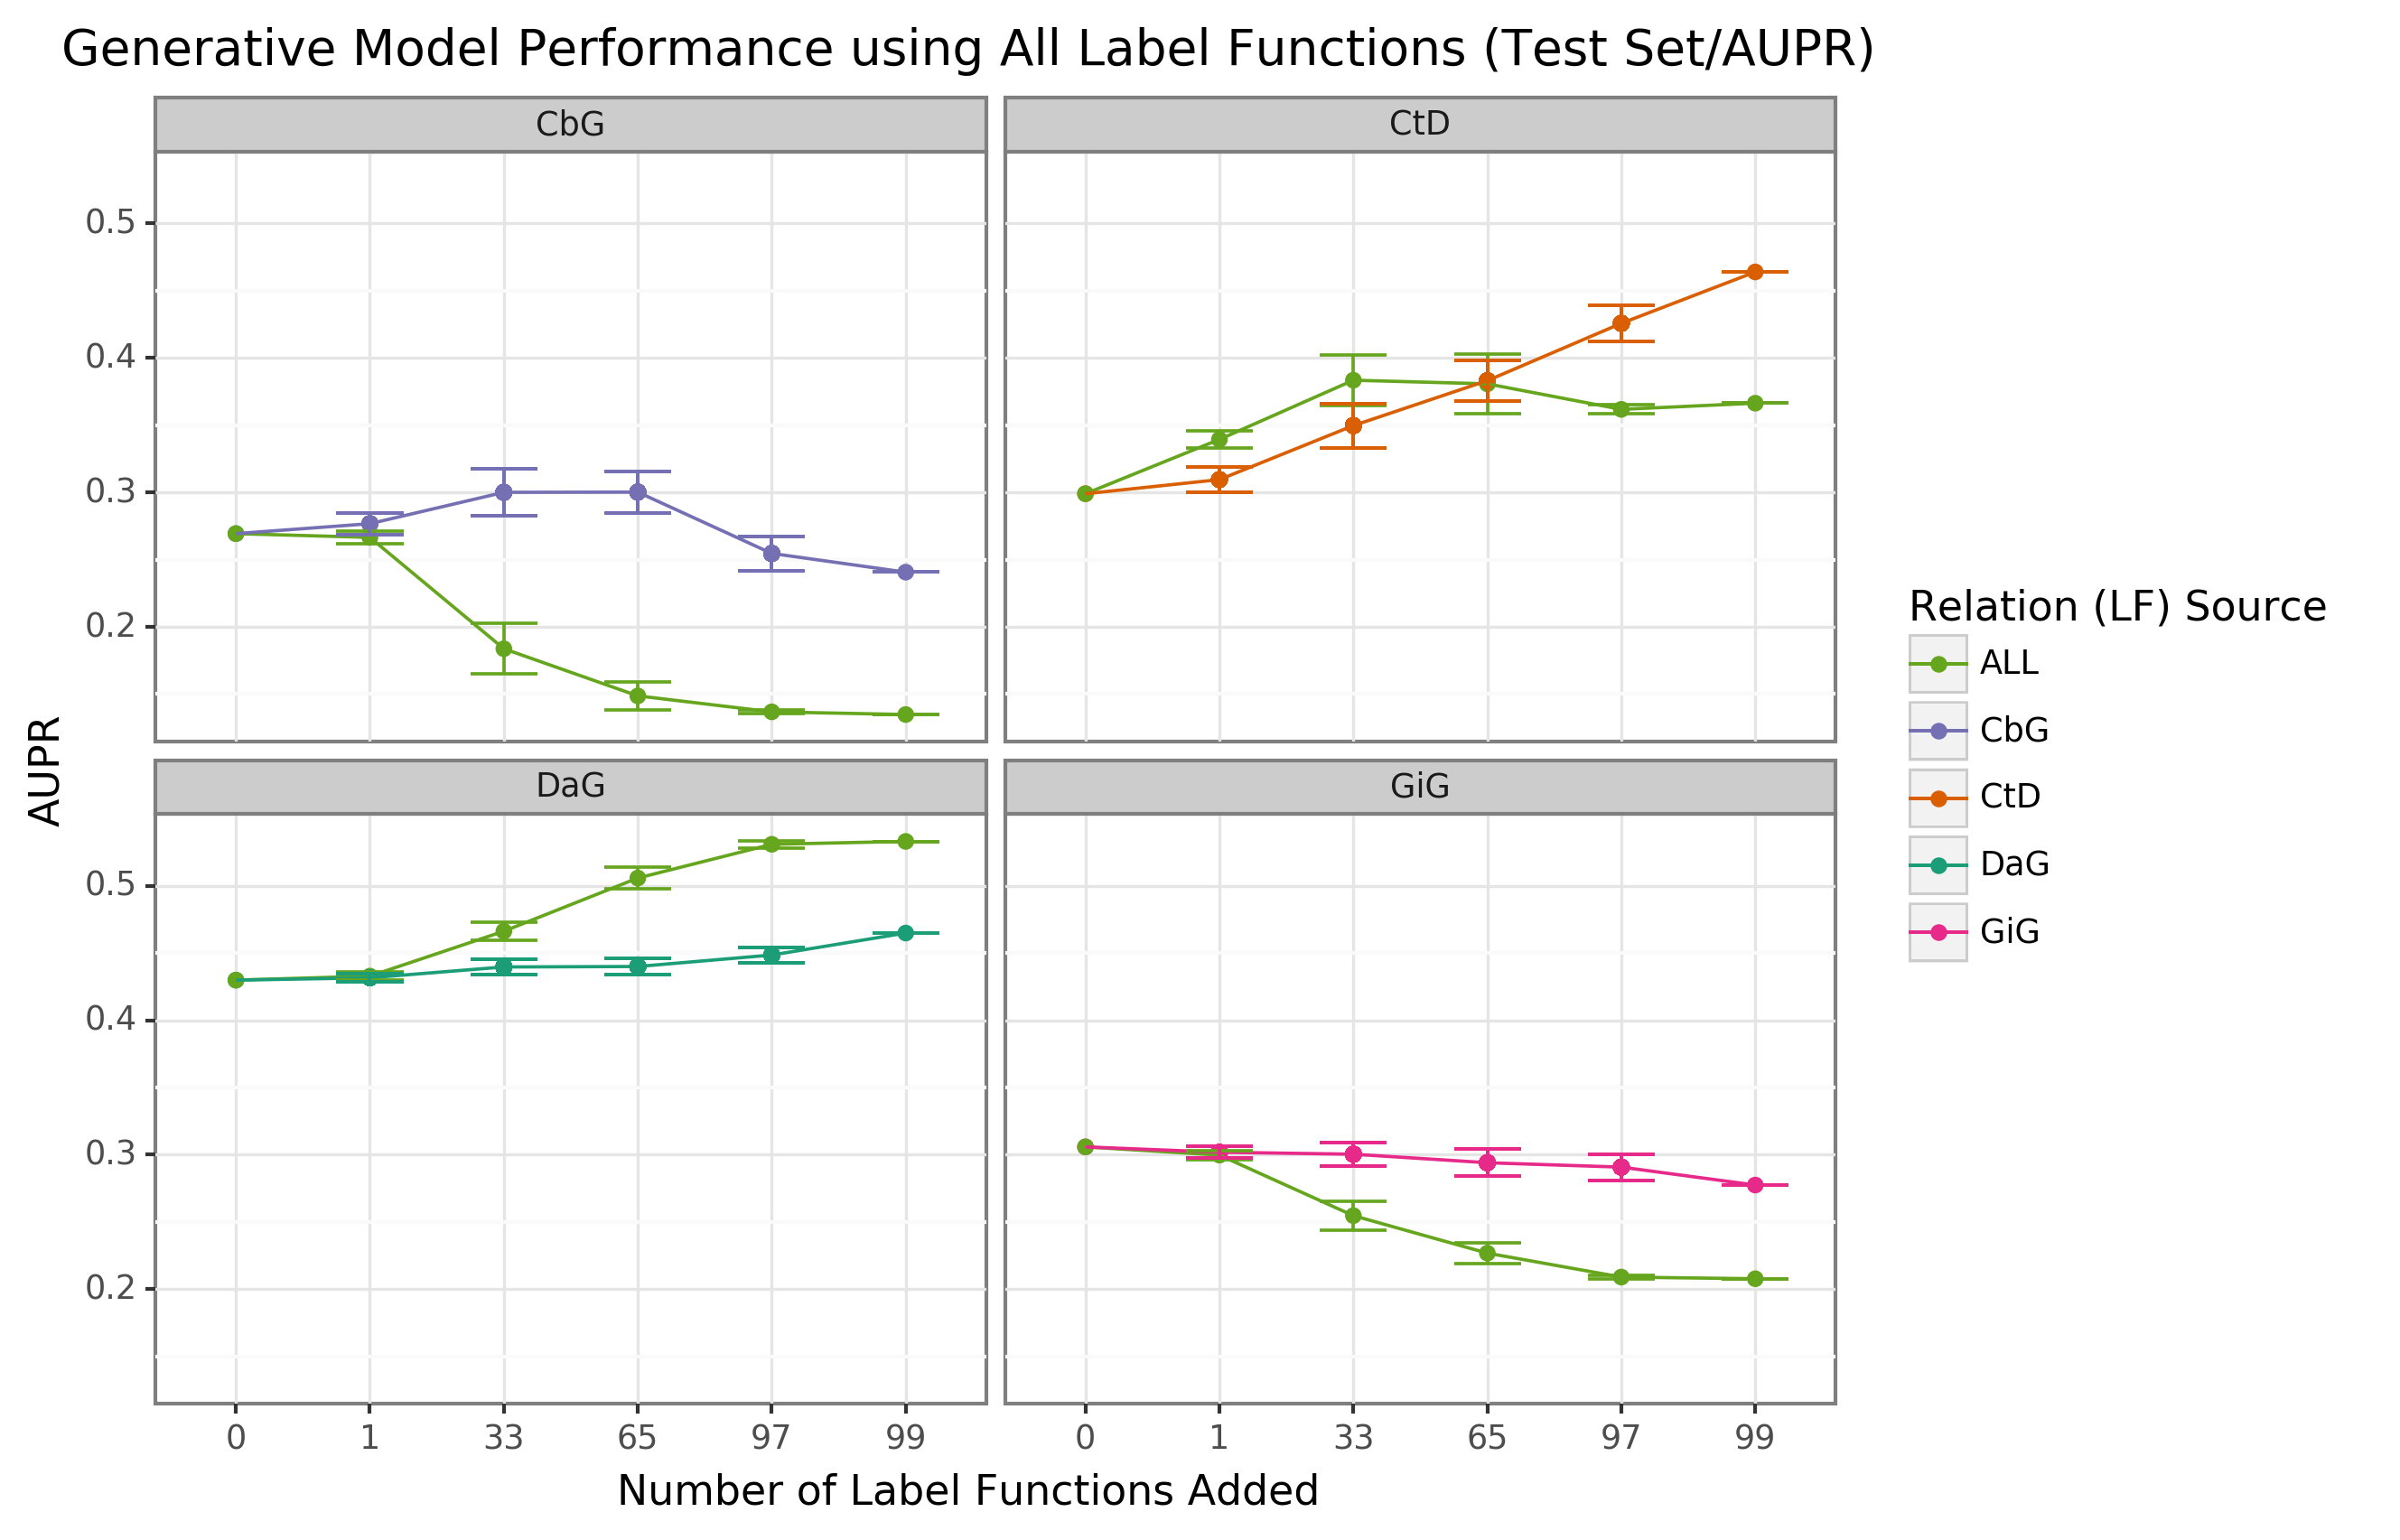 Figure 7: Using all label functions generally hinders generative model performance. Each line plot header depicts the edge type the generative model is trying to predict, while the colors represent the source of label functions. For example, orange represents sampling label functions designed to predict the Compound treats Disease (CtD) edge type. The x-axis shows the number of randomly sampled label functions incorporated as an addition to the database-only baseline model (the point at 0). The y-axis shows the area under the precision-recall curve (AUPR). Each point on the plot shows the average of 50 sample runs, while the error bars show the 95% confidence intervals of all runs. The baseline and “All” data points consist of sampling from the entire fixed set of label functions.